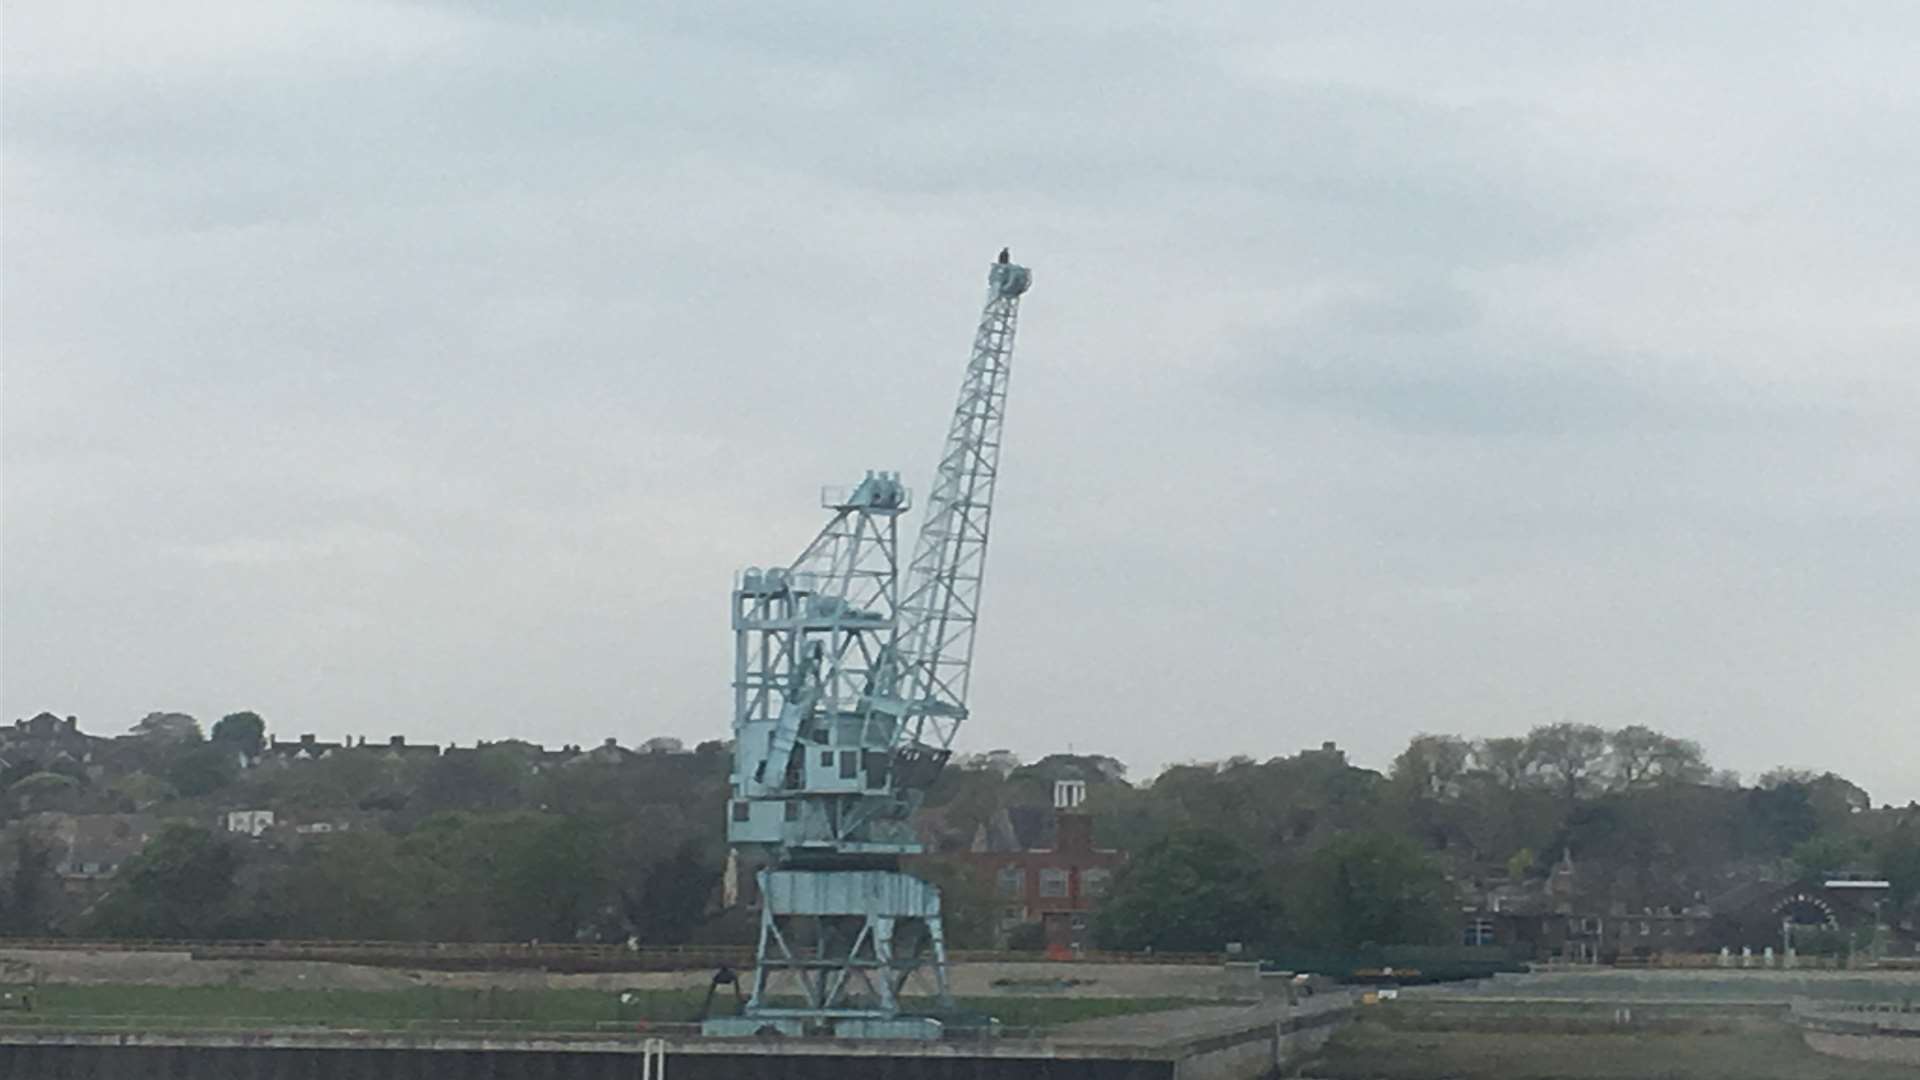 The man on top of the crane.